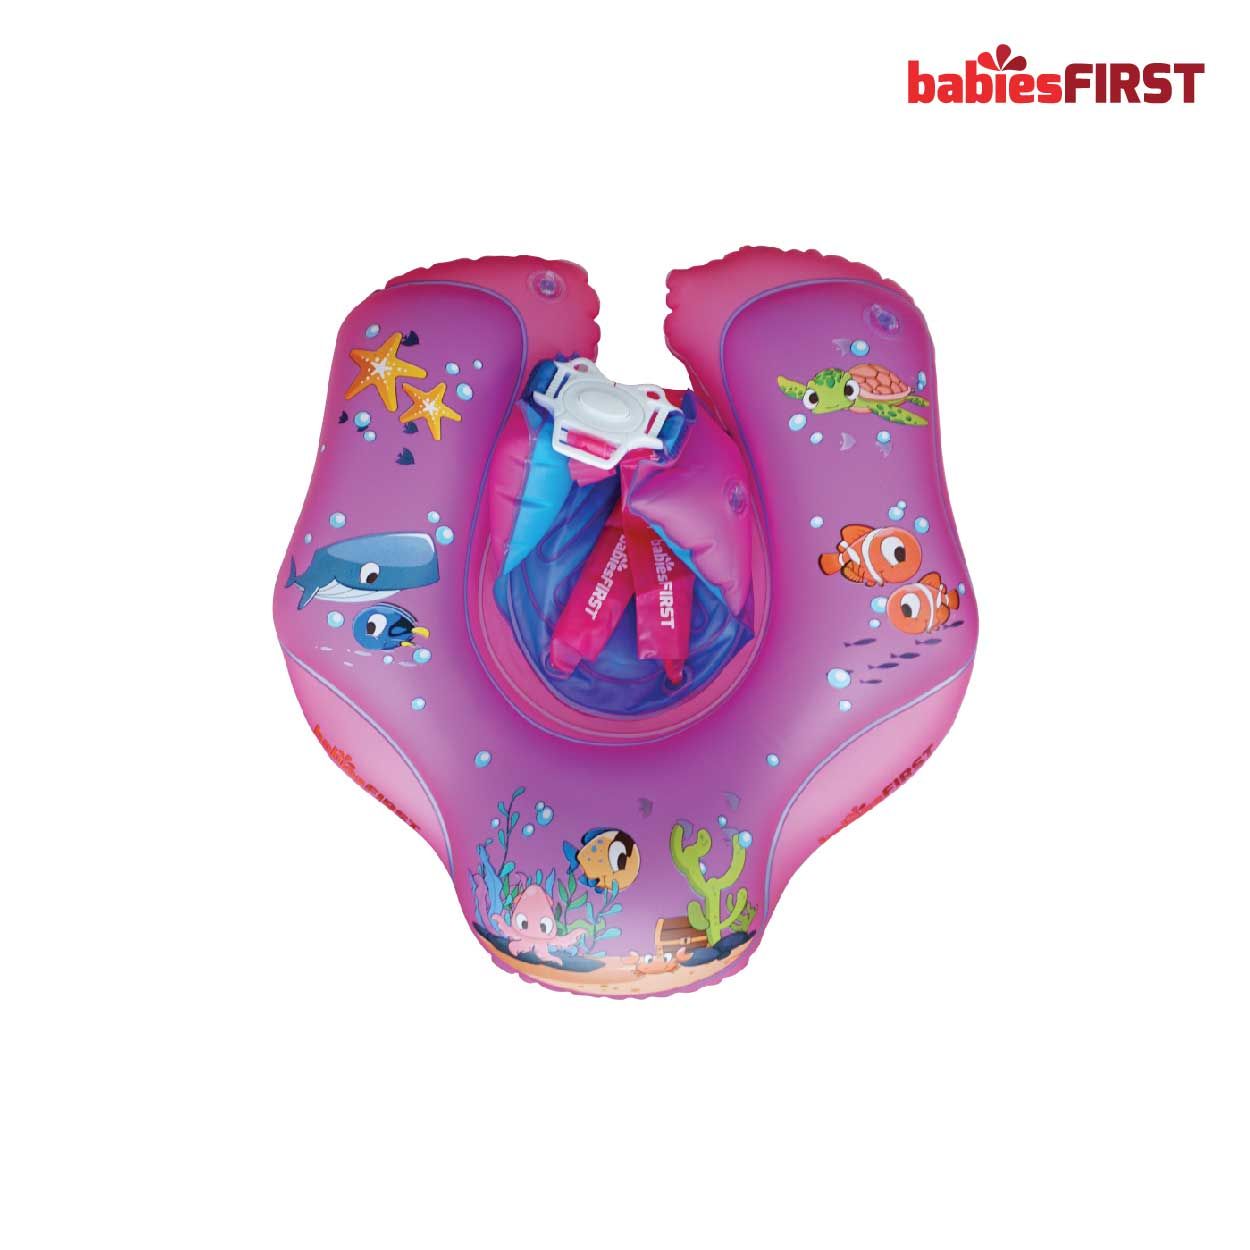 Babiesfirst Inflatable Swim Training Pink - 1